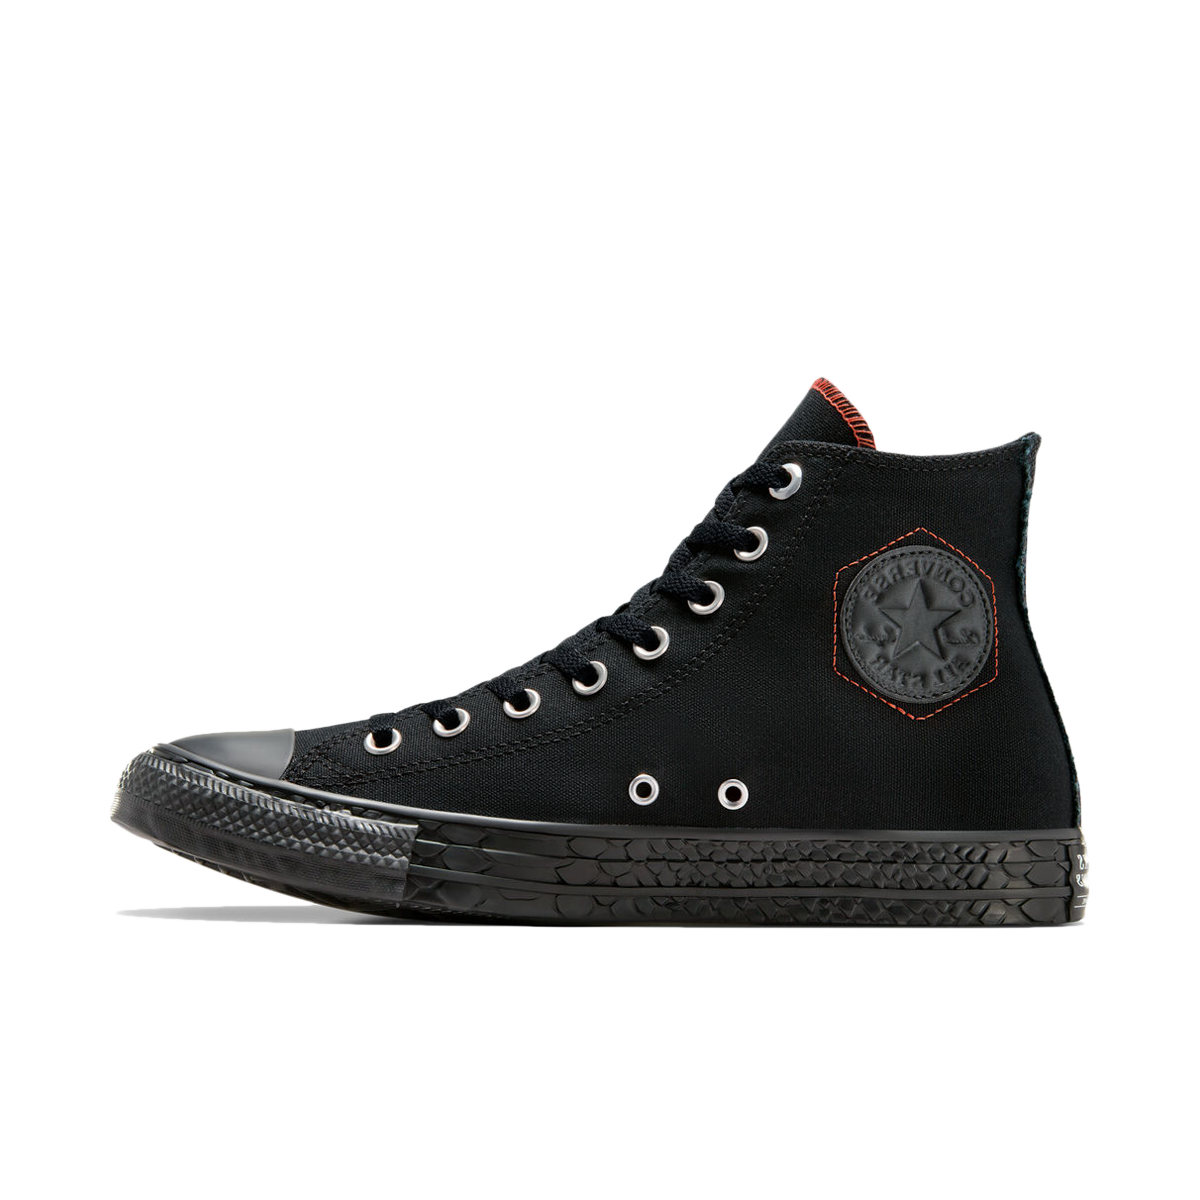 Dungeons & Dragons x Converse Chuck Taylor All Star 'Dragon Scales'